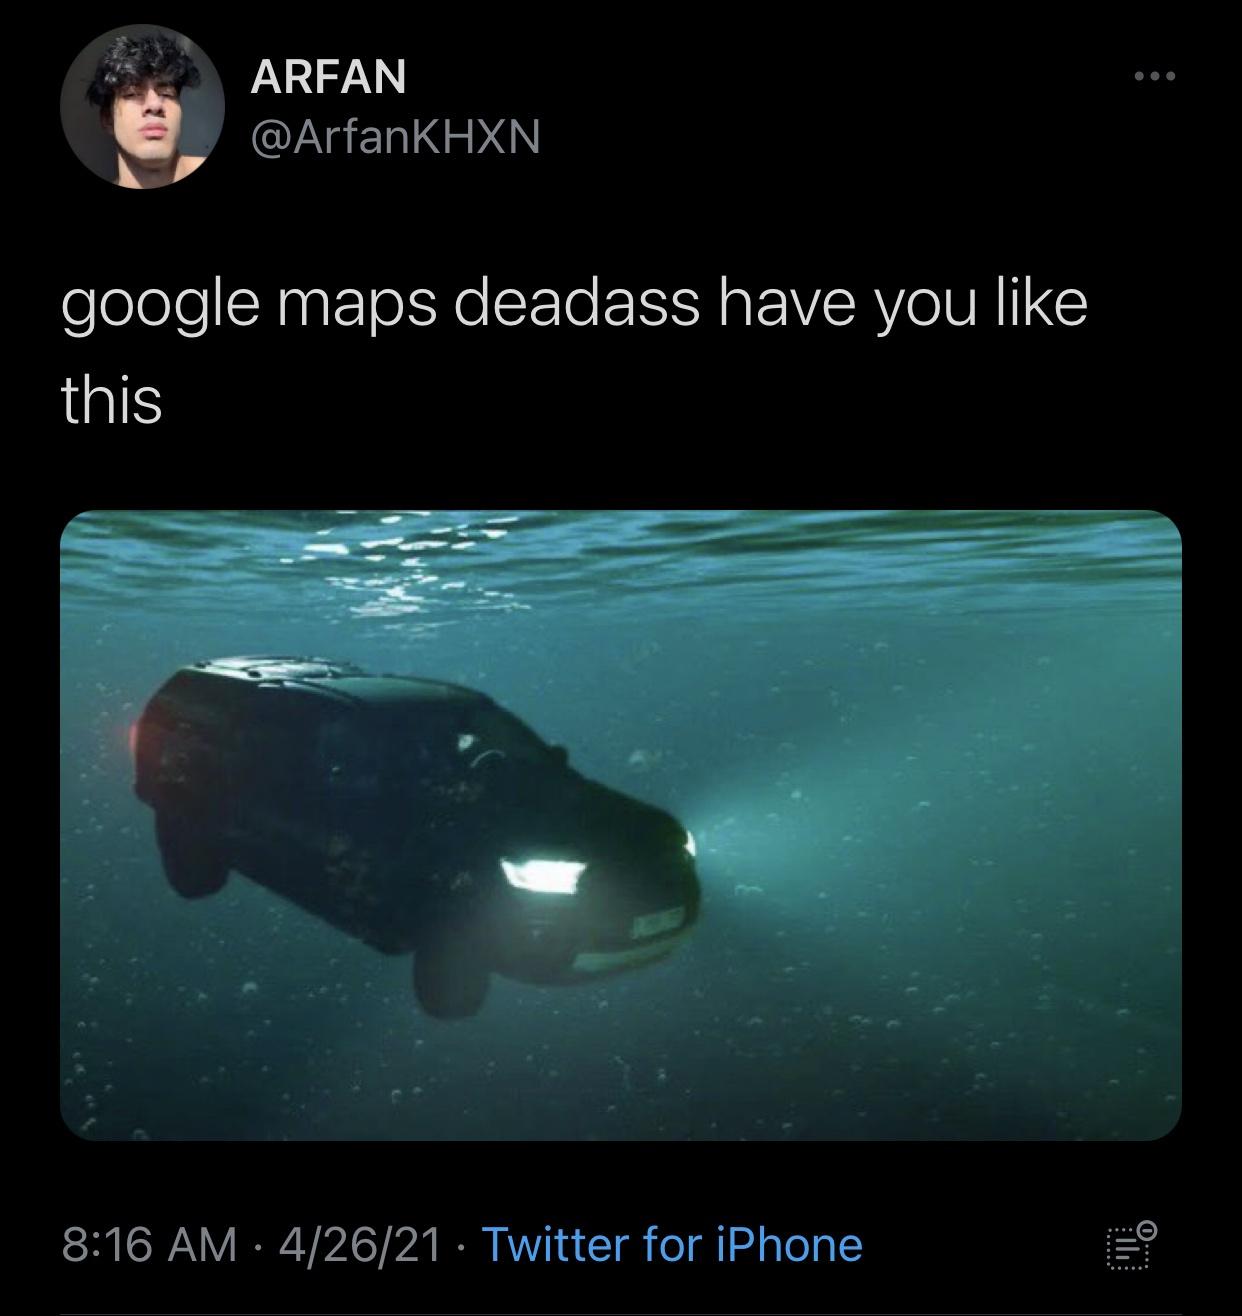 funny tweets - underwater - Arfan google maps deadass have you this 42621 Twitter for iPhone